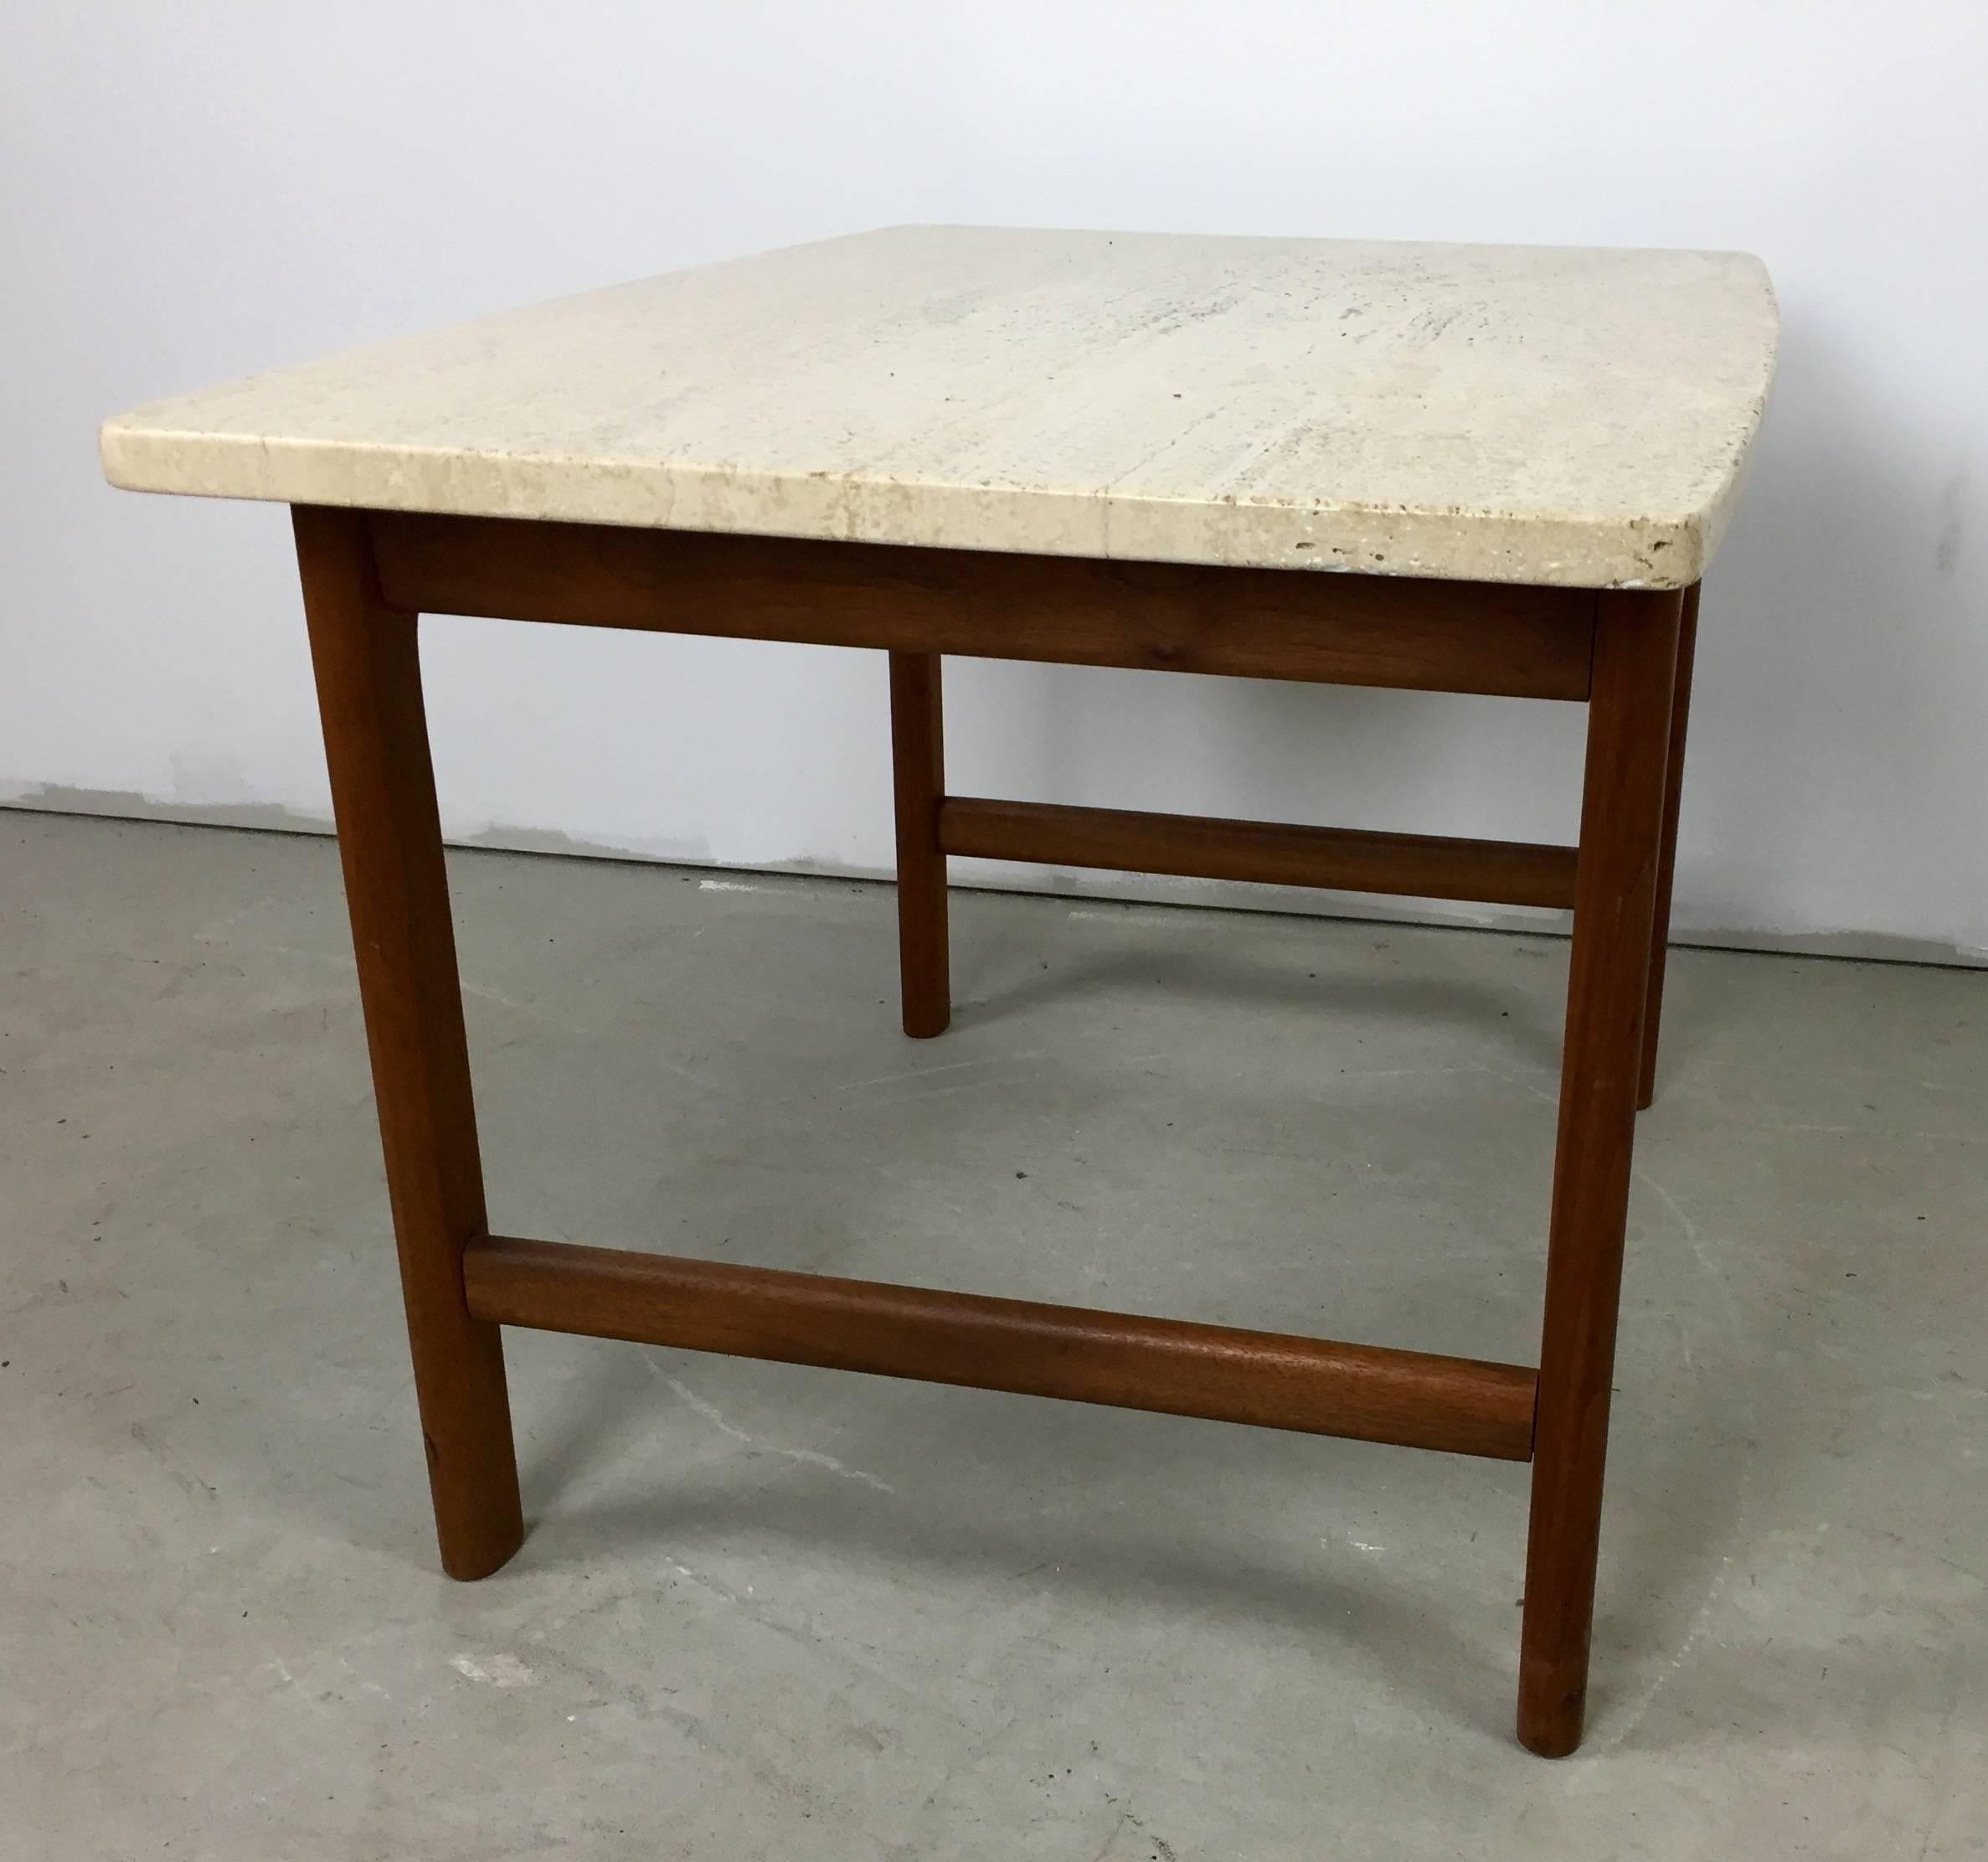 A solid teak lamp table with a travertine marble-top designed by Folke Ohlsson for DUX. In excellent condition and with elegant proportions.